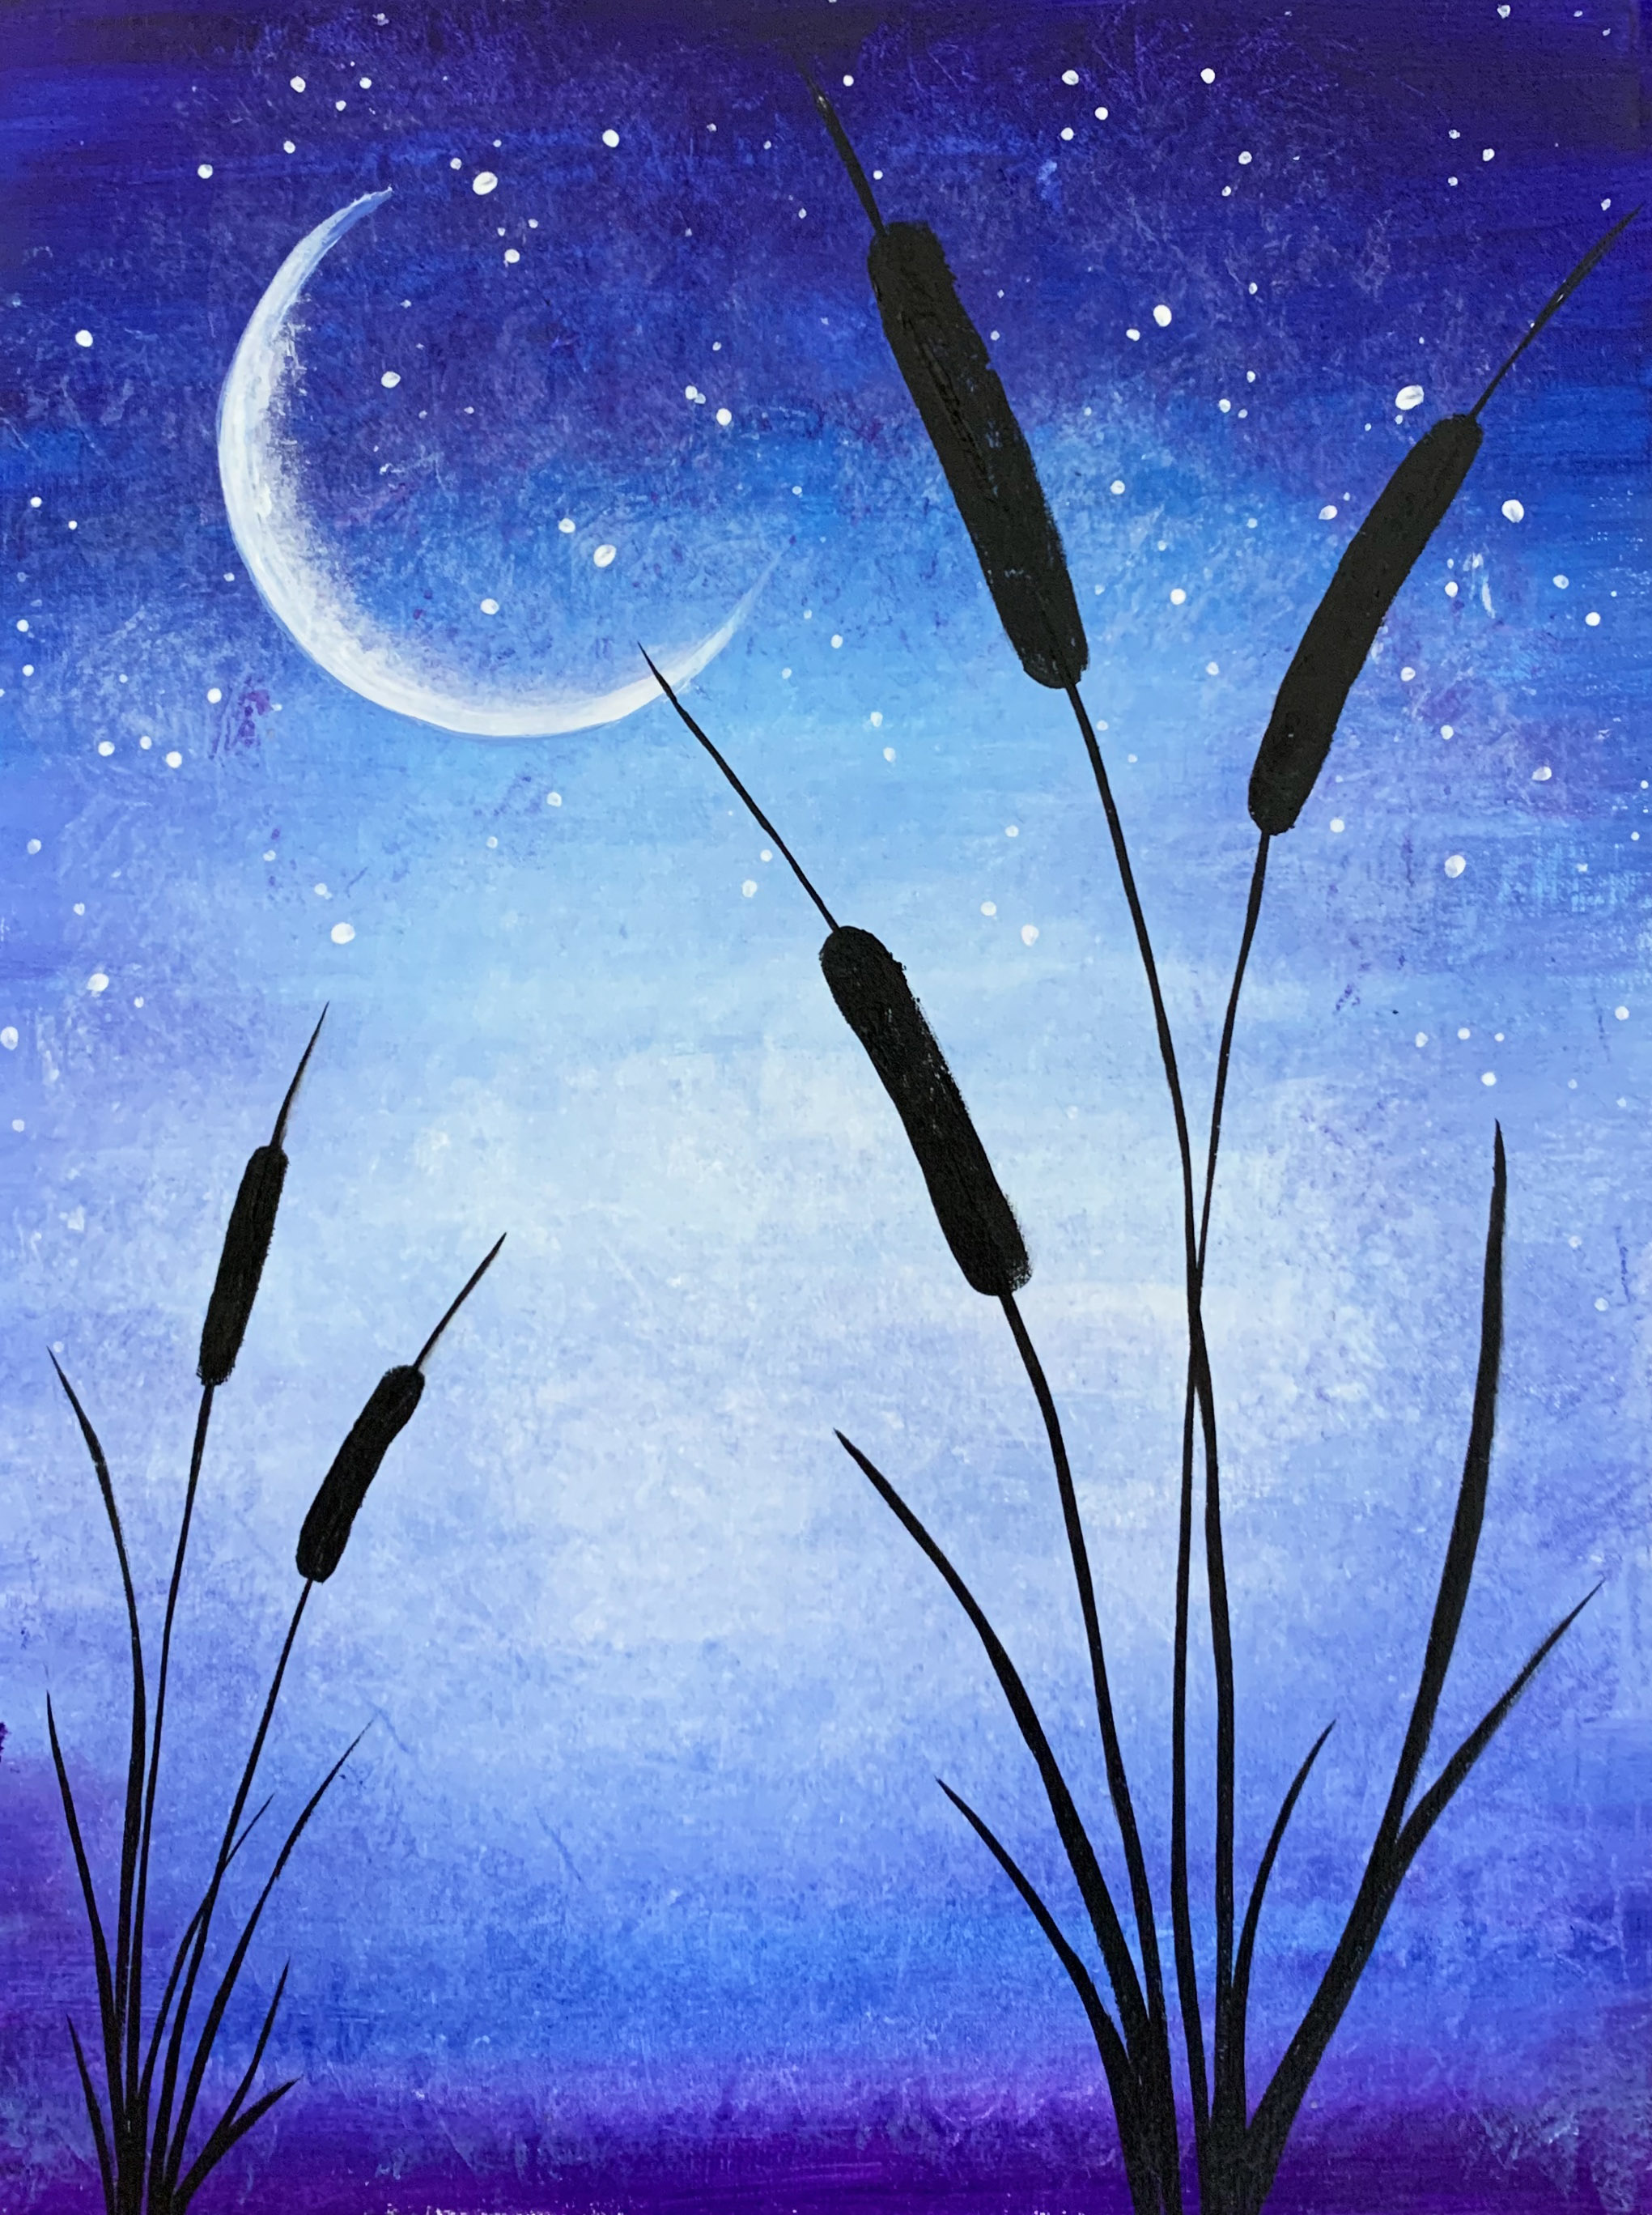 A Moonlight Cattail Silhouette experience project by Yaymaker